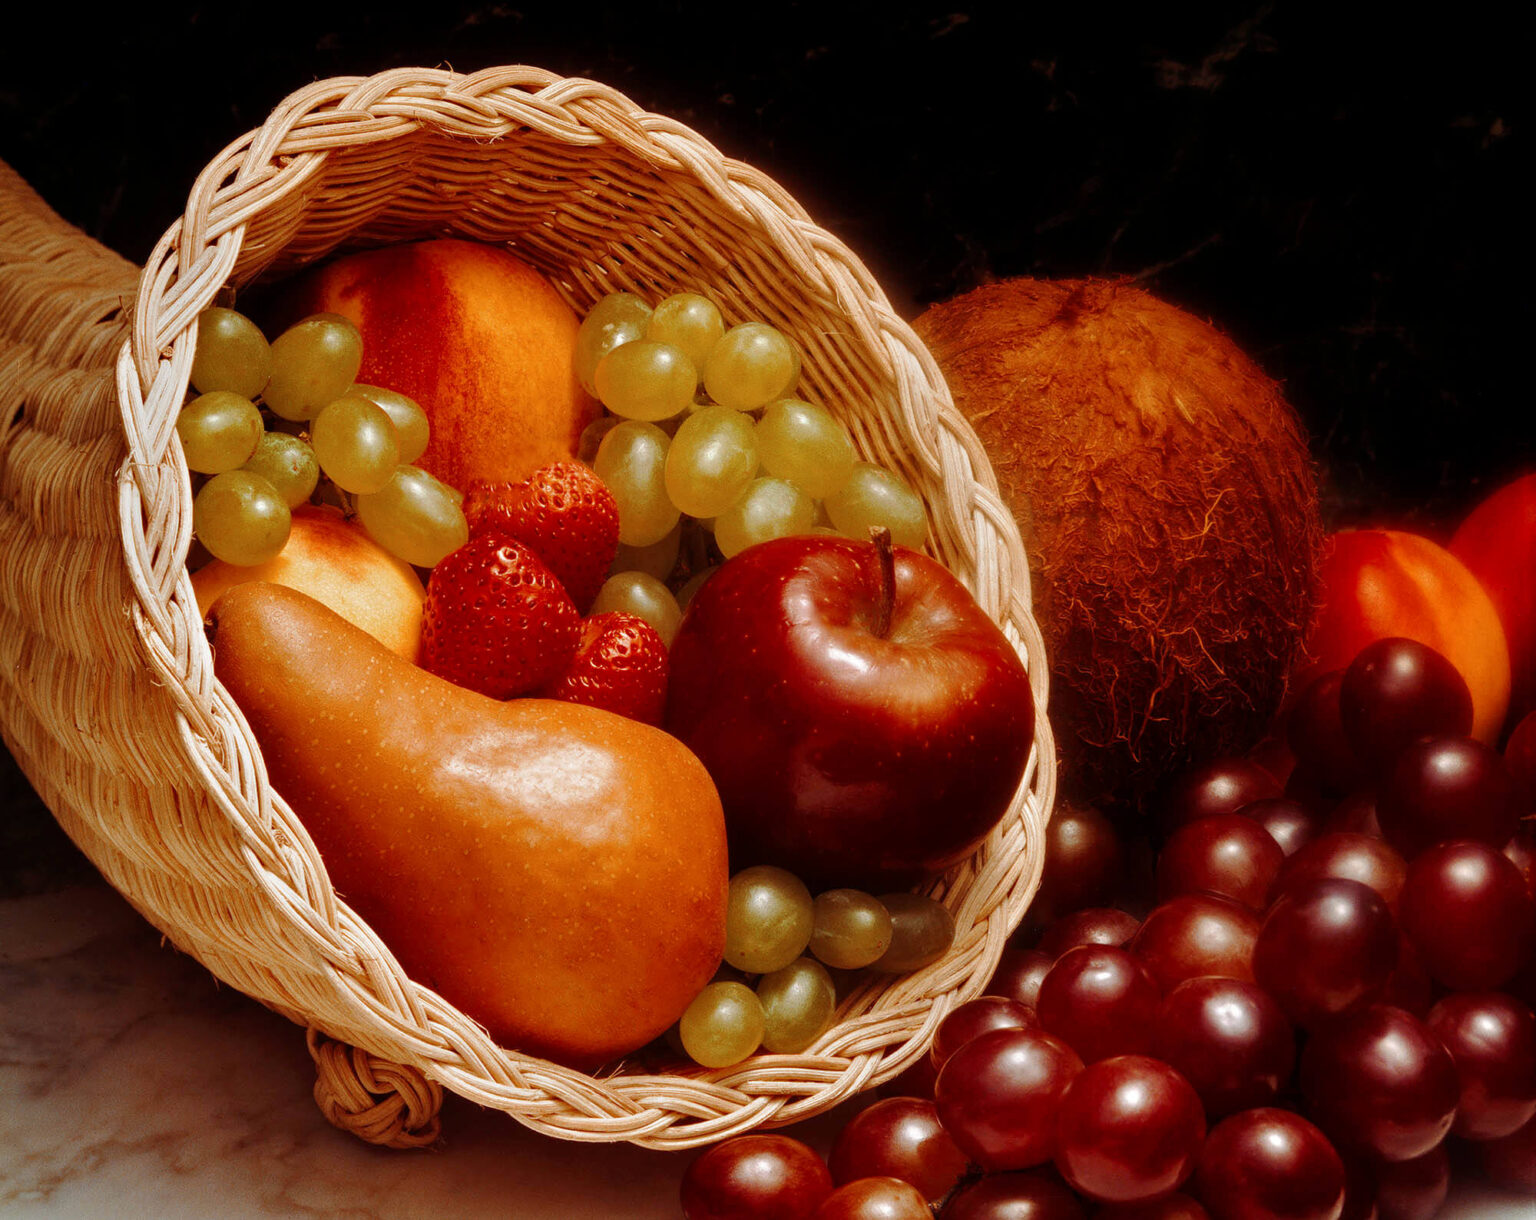 CORNUCOPIA of fresh fruit with grapes, pear, coconut, and nectorines